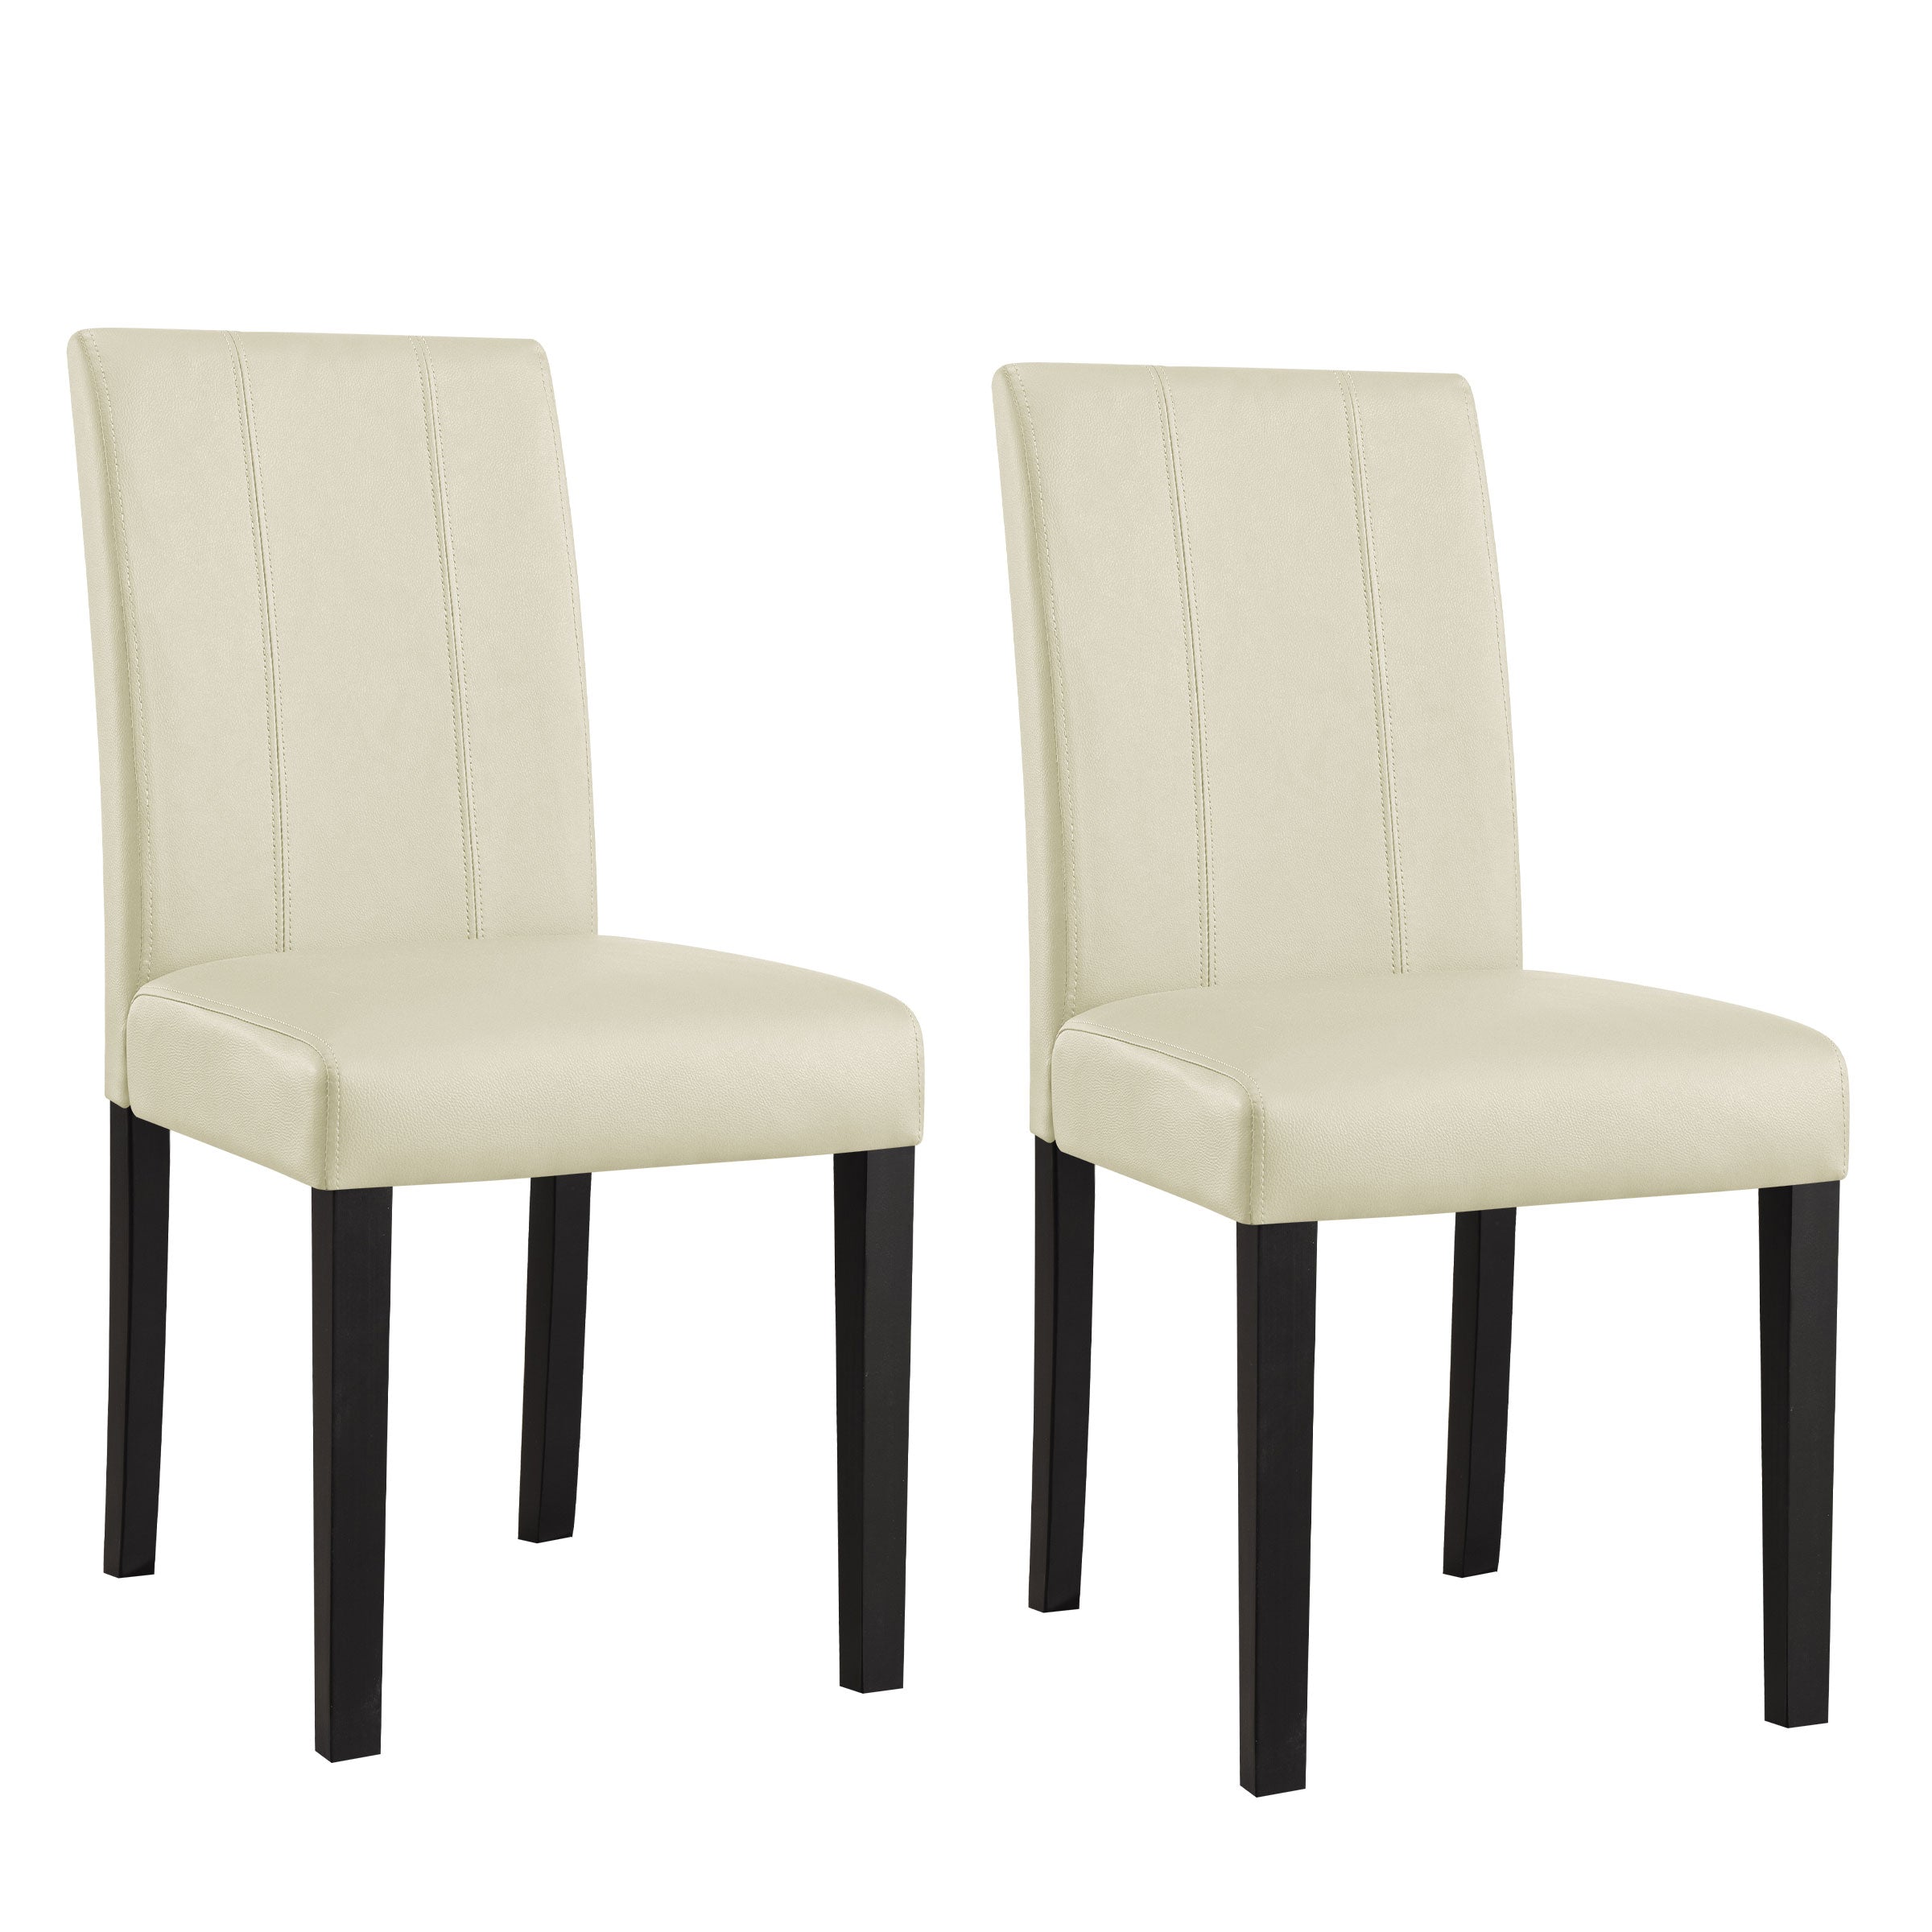 Modern Upholstered PU Leather Dining Chairs